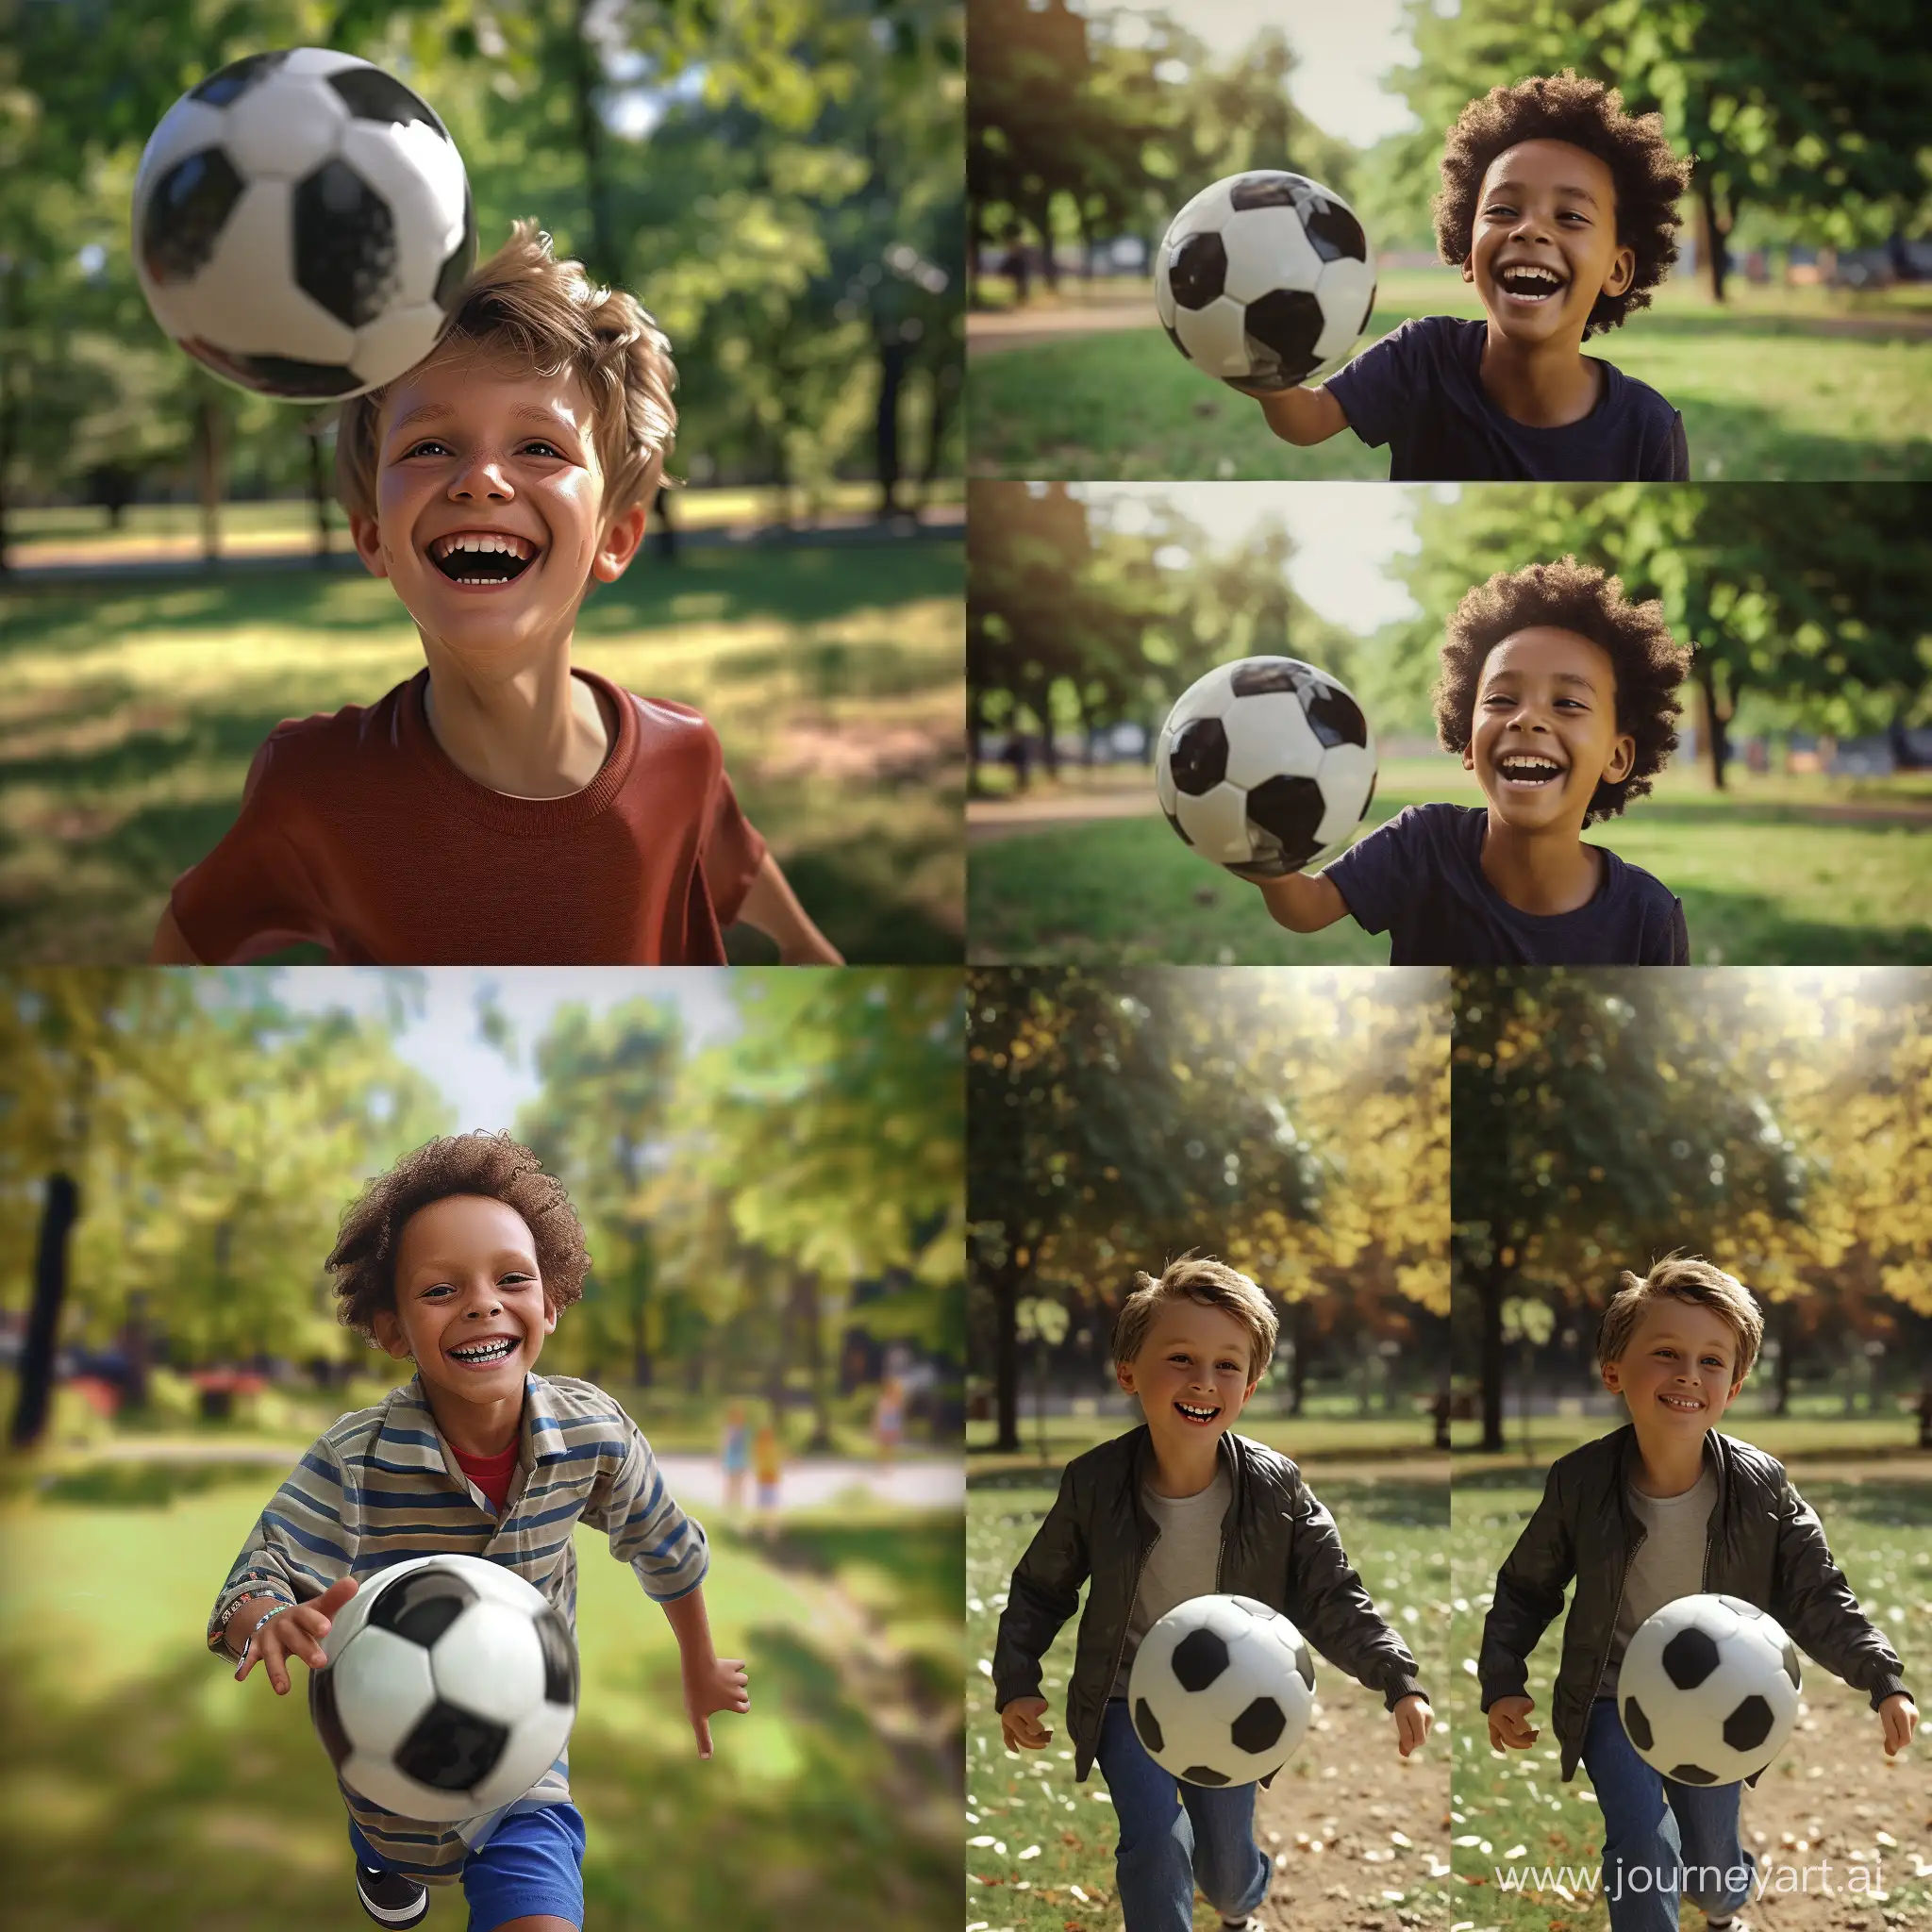 create a photorealistic photograph of a smiling 10 year old kid playing football (soccer) in a park. Please make it as photorealistic as possible, it should be indistinguishible from a regular photo.